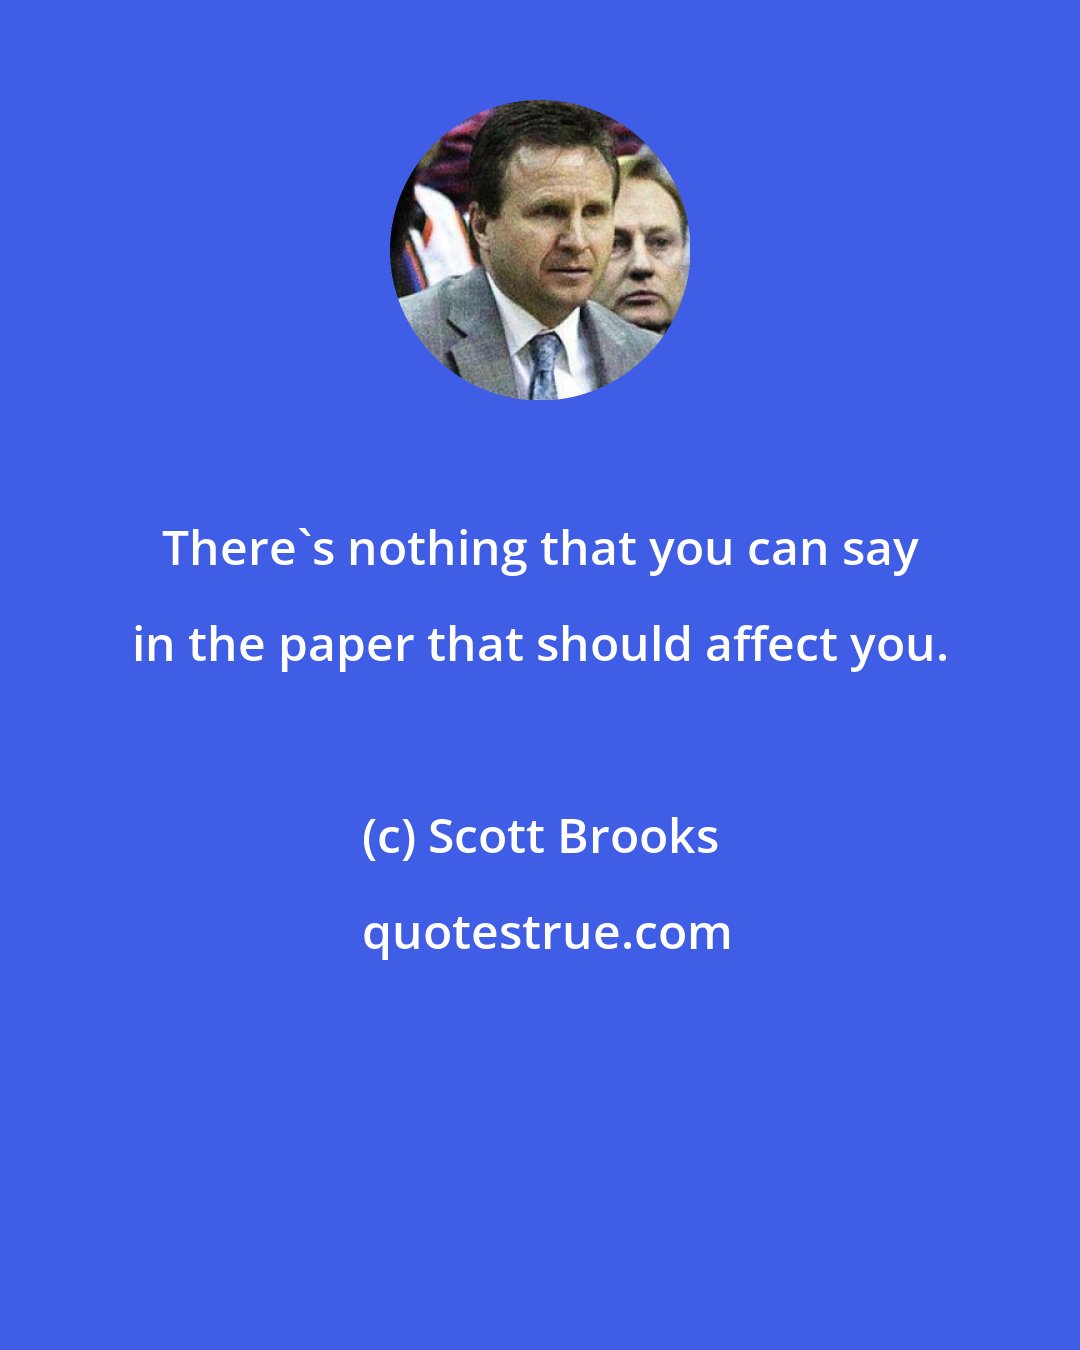 Scott Brooks: There's nothing that you can say in the paper that should affect you.